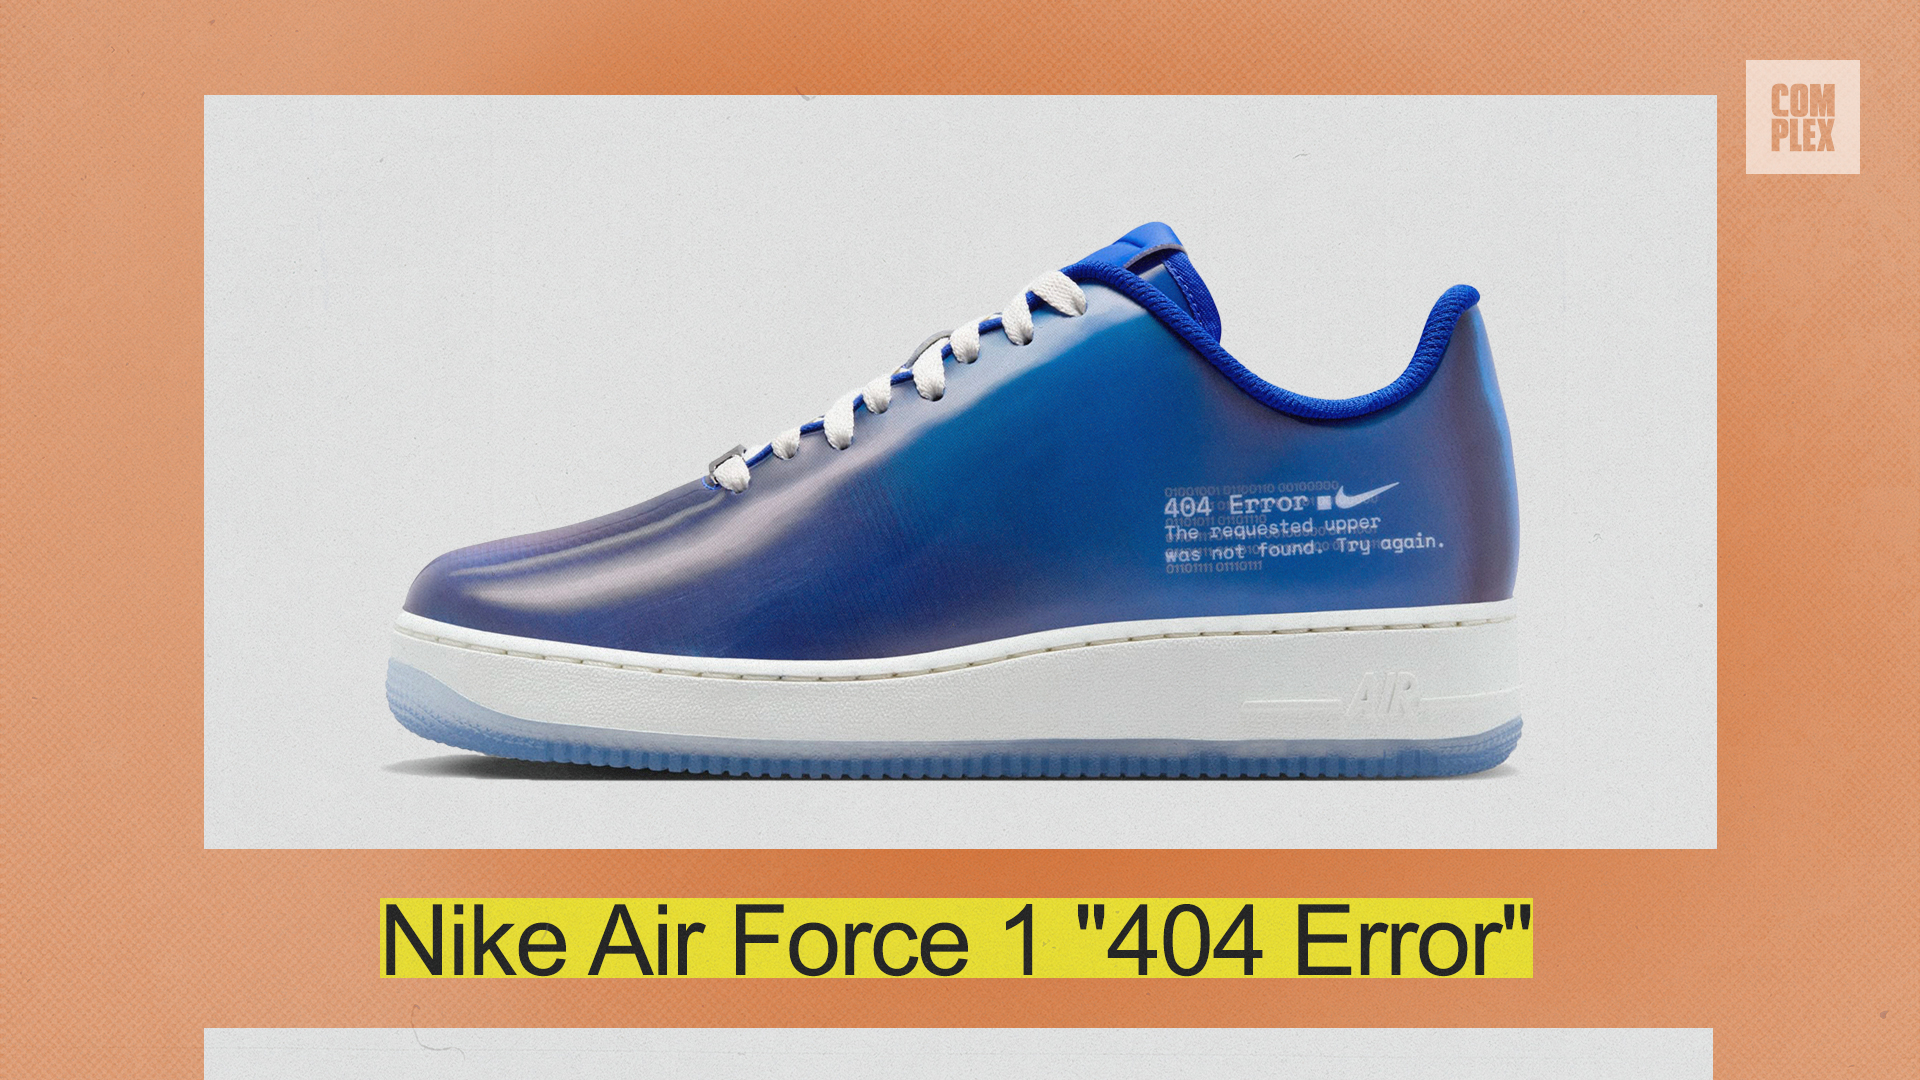 Nike Air Force 1 &quot;404 Error&quot; sneaker, featuring a sleek design with the text &quot;404 Error - The requested sneaker was not found. Try again.&quot; on the side